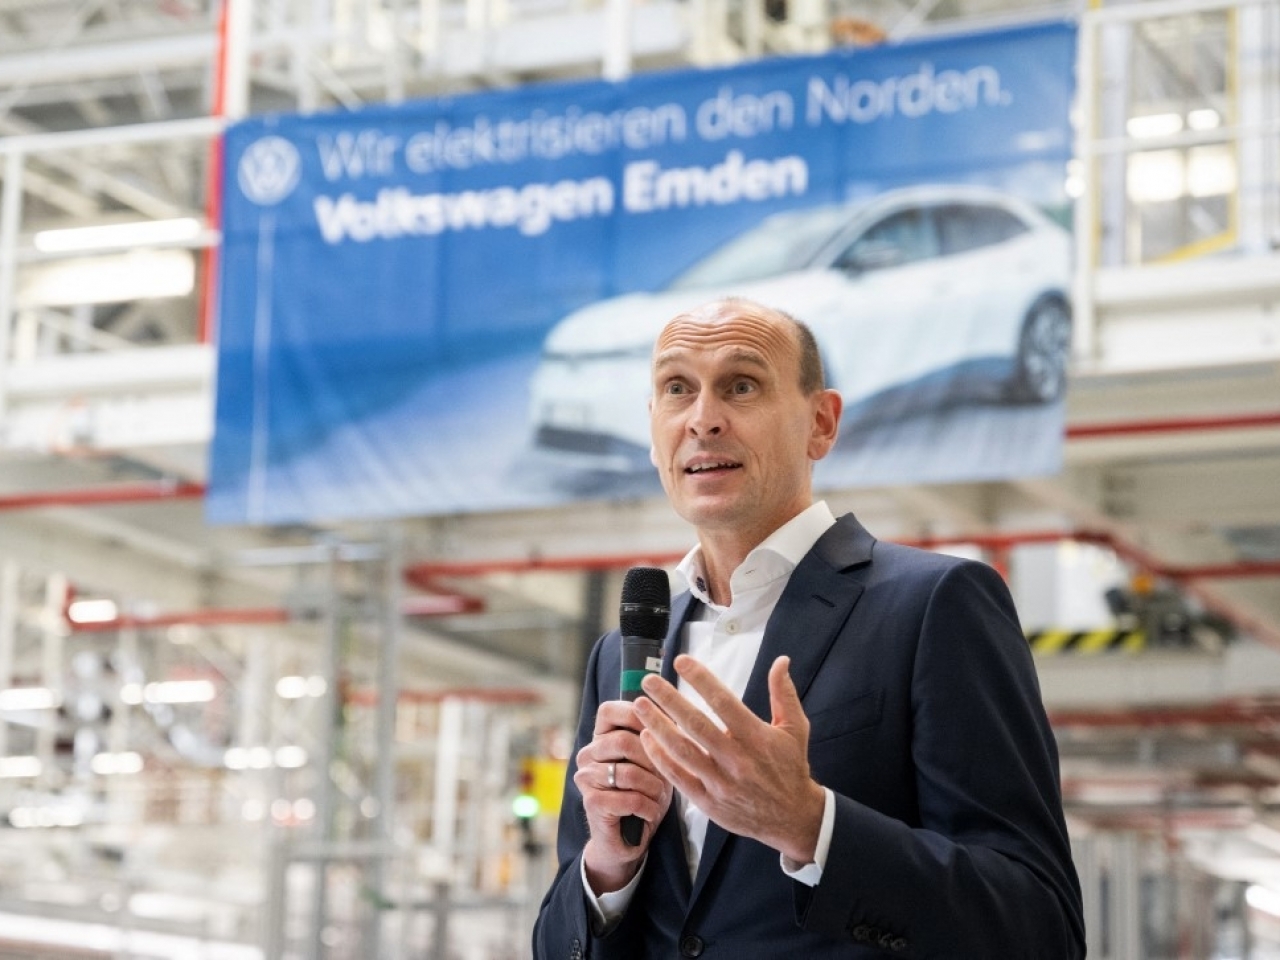 Volkswagen's Ralf Brandstaetter said the move is a key step in the group's in China, for China strategy. File photo: AFP